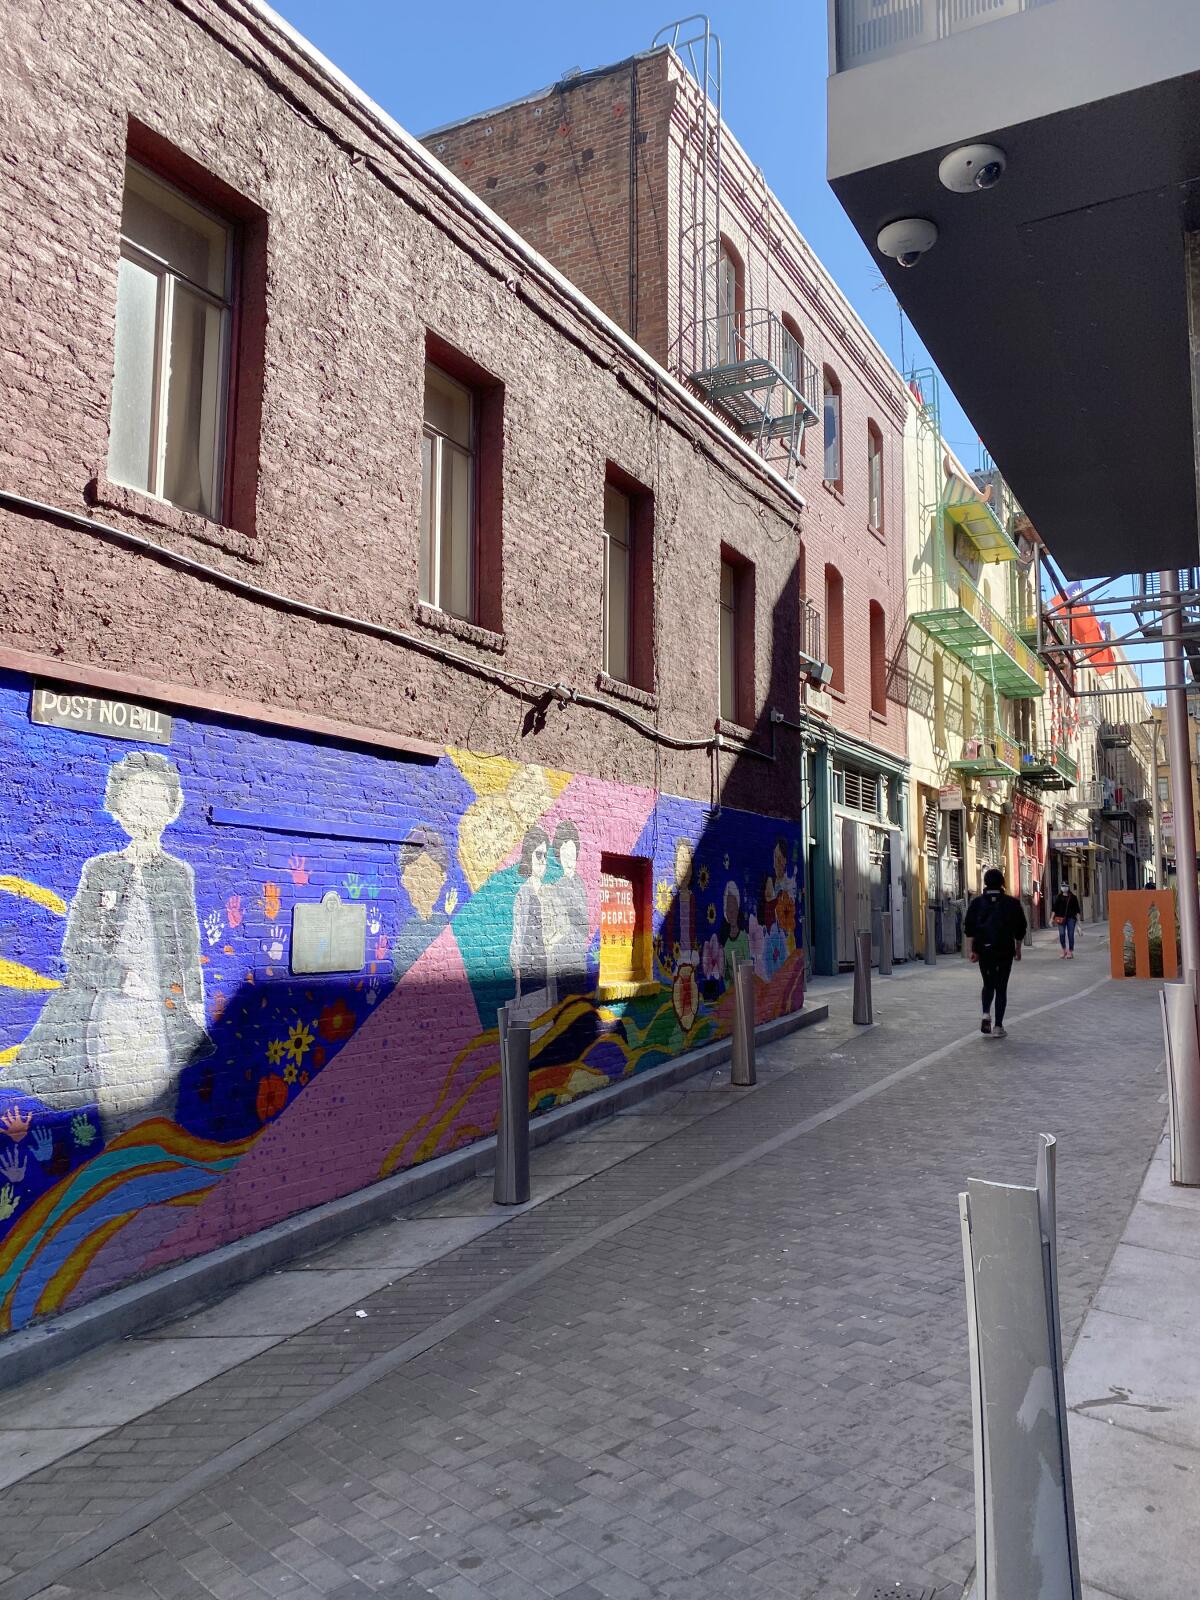 Cynthia Fok captures a once busy alleyway in San Francisco's Chinatown and a mural